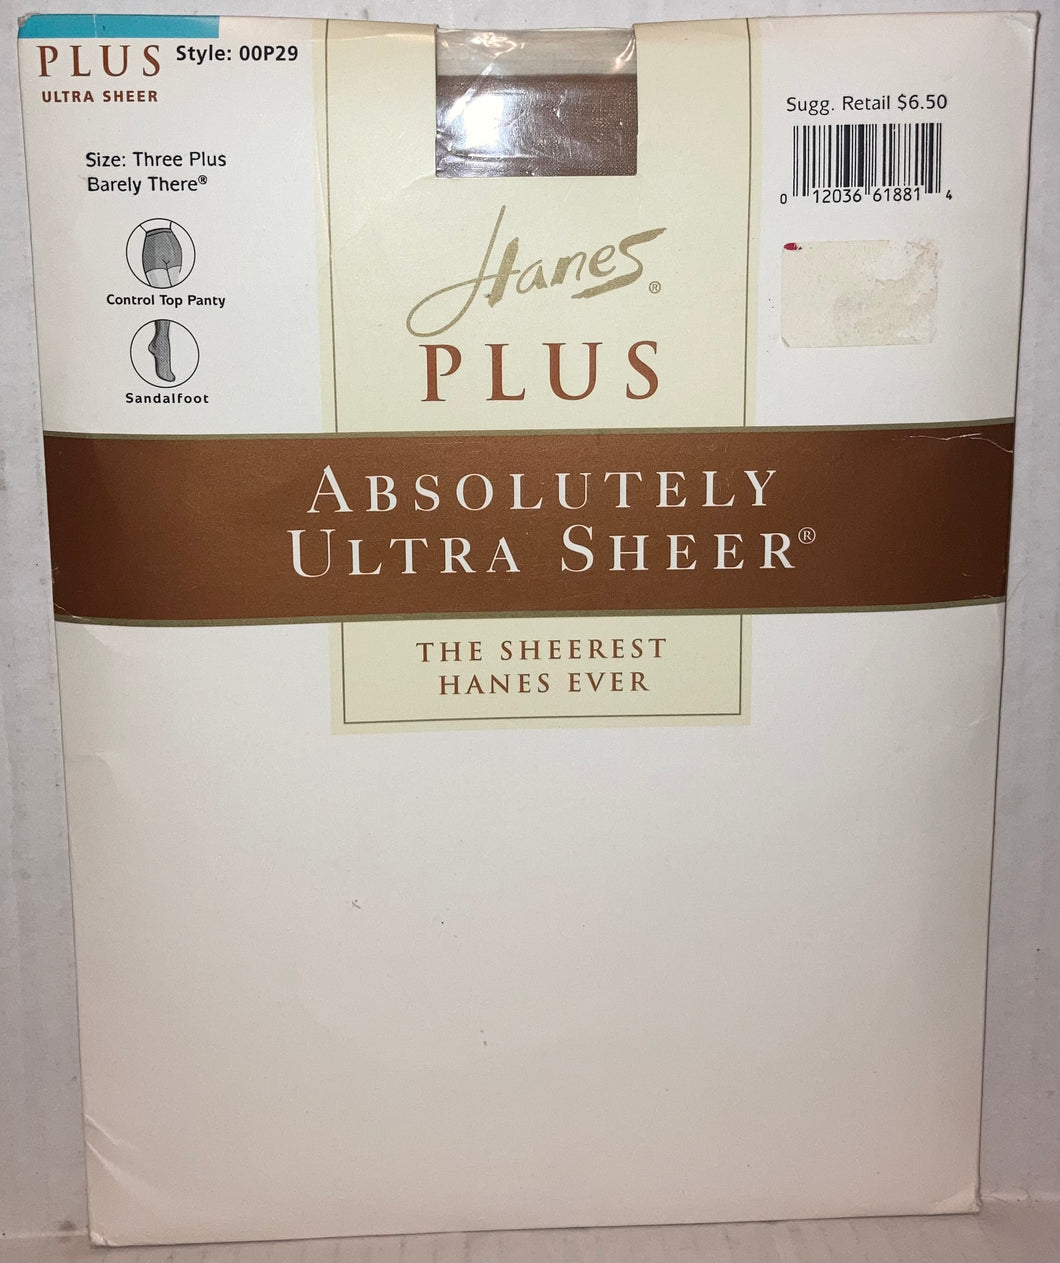 Hanes Plus Size Women’s Sheer Pantyhose NWT New 1999 Size Three Plus Ultra Sheer Style 00P29